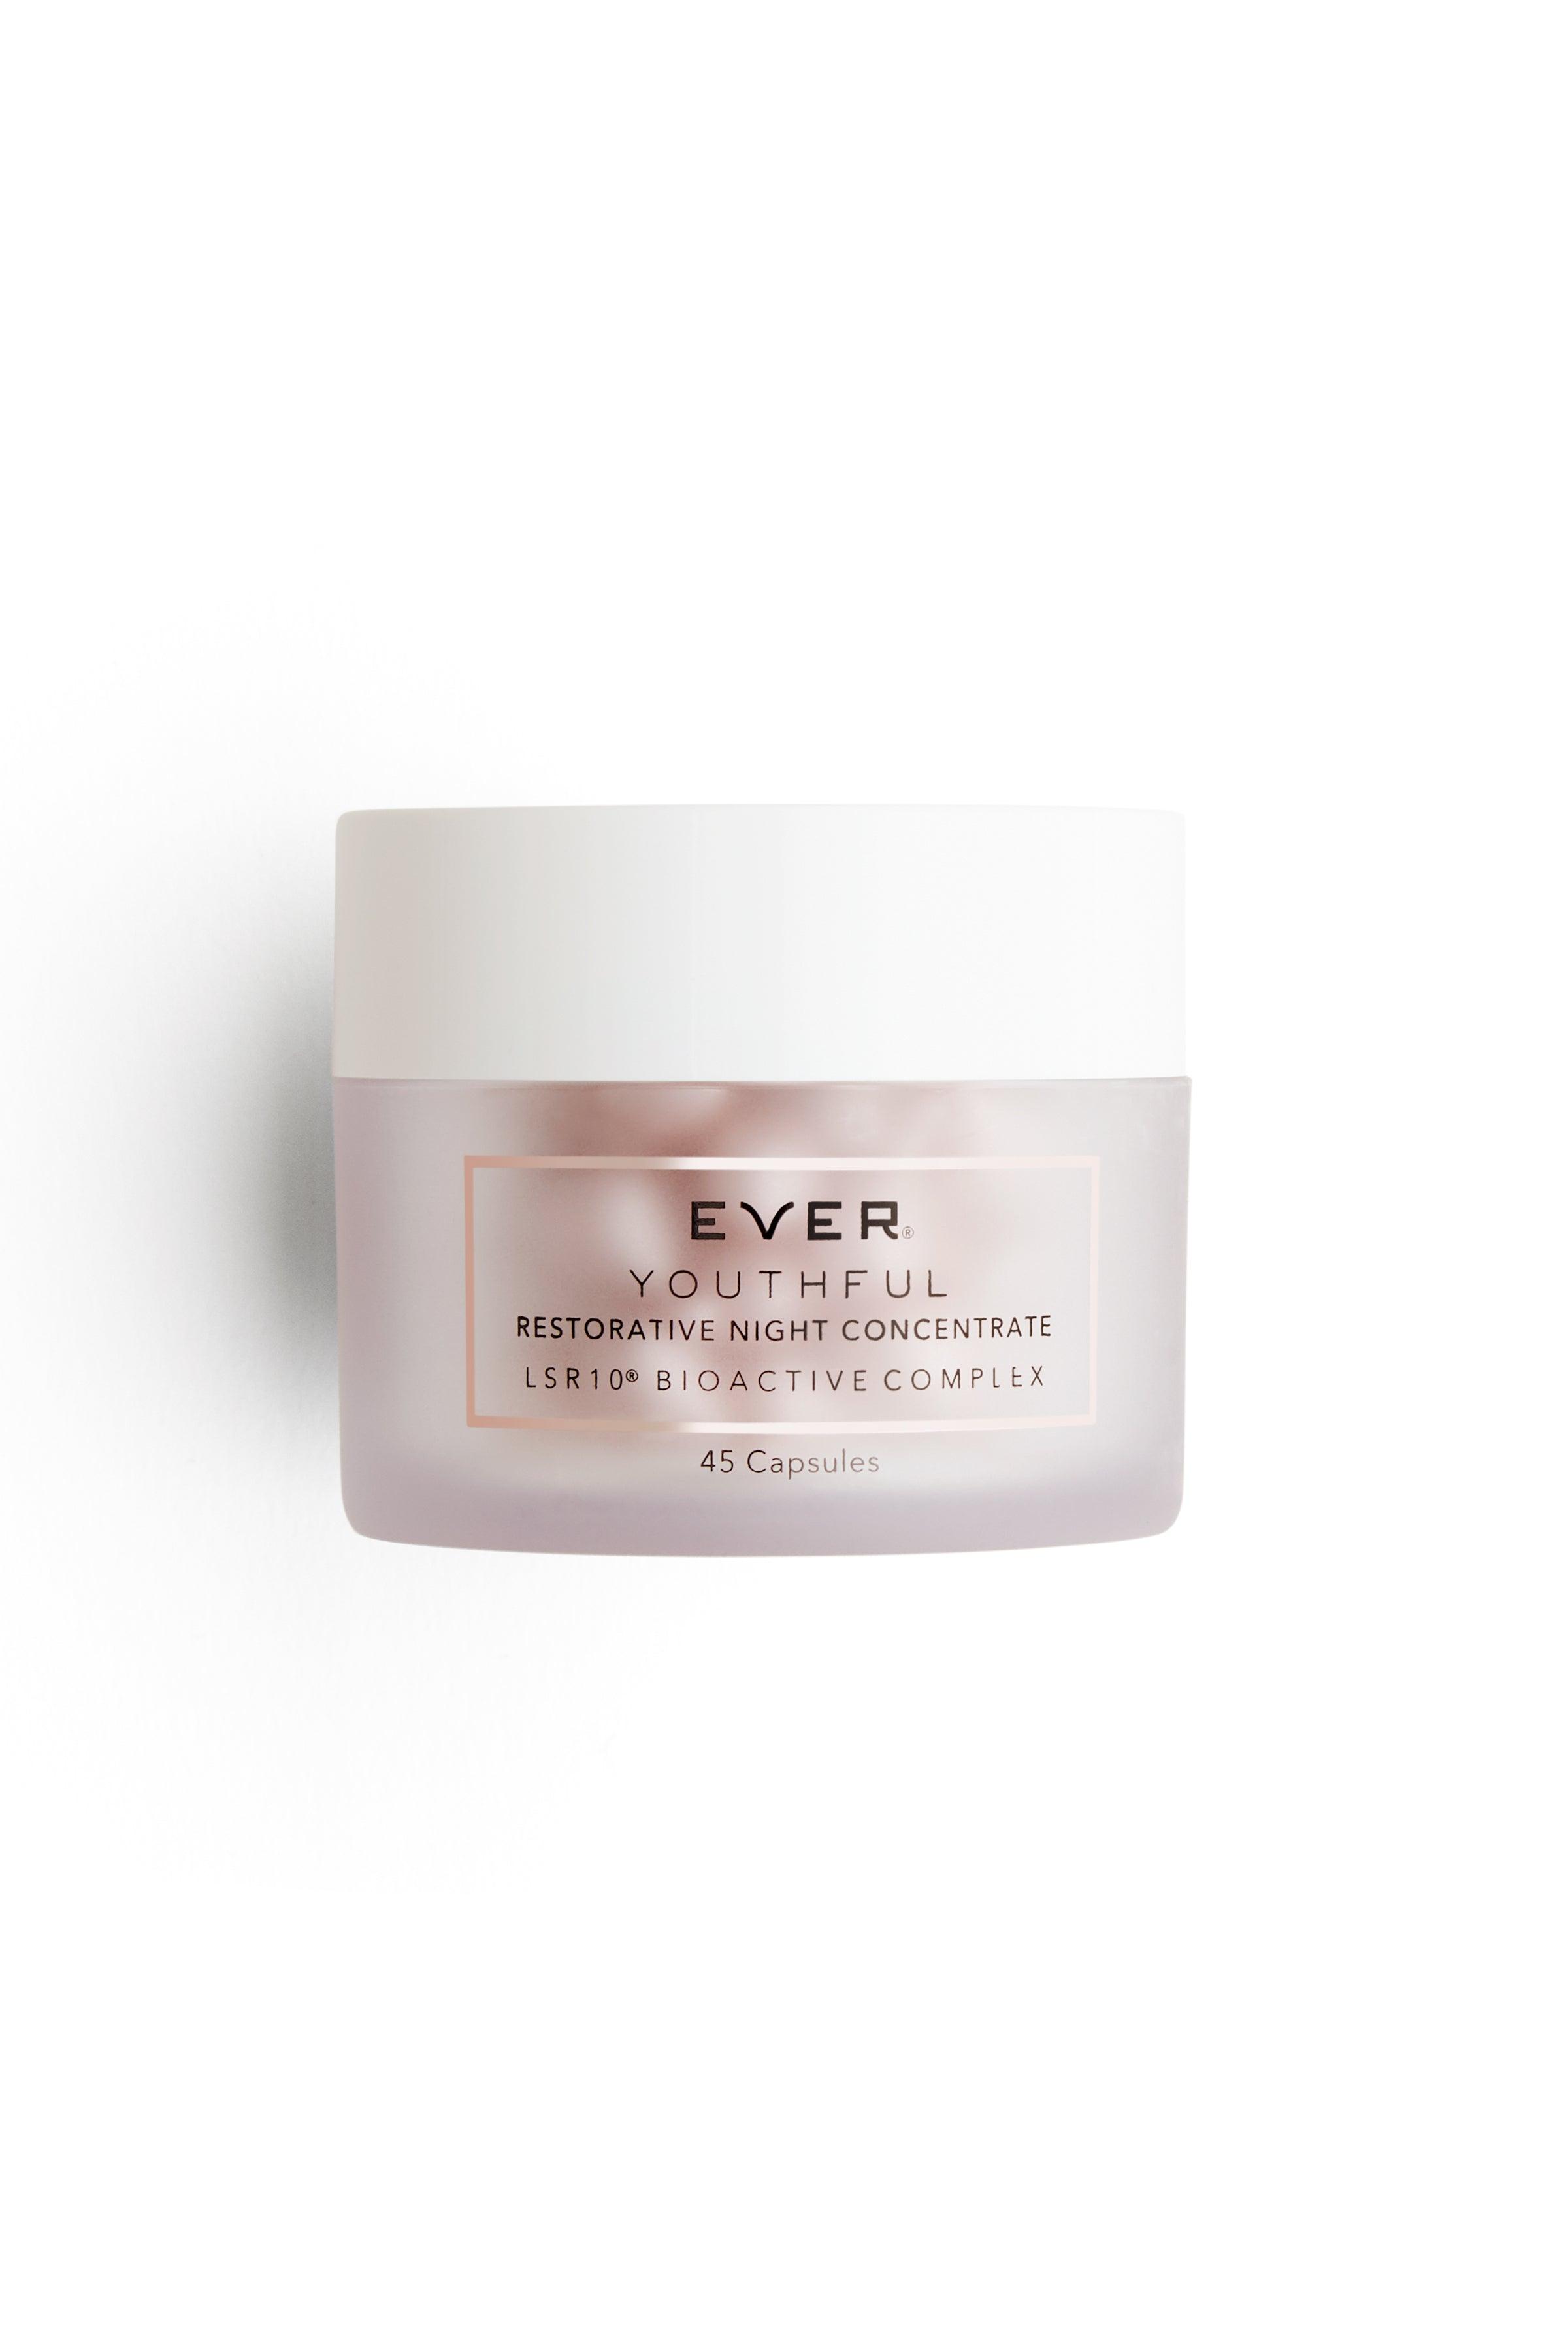 YOUTHFUL Restorative Night Concentrate with LSR10® - EVER